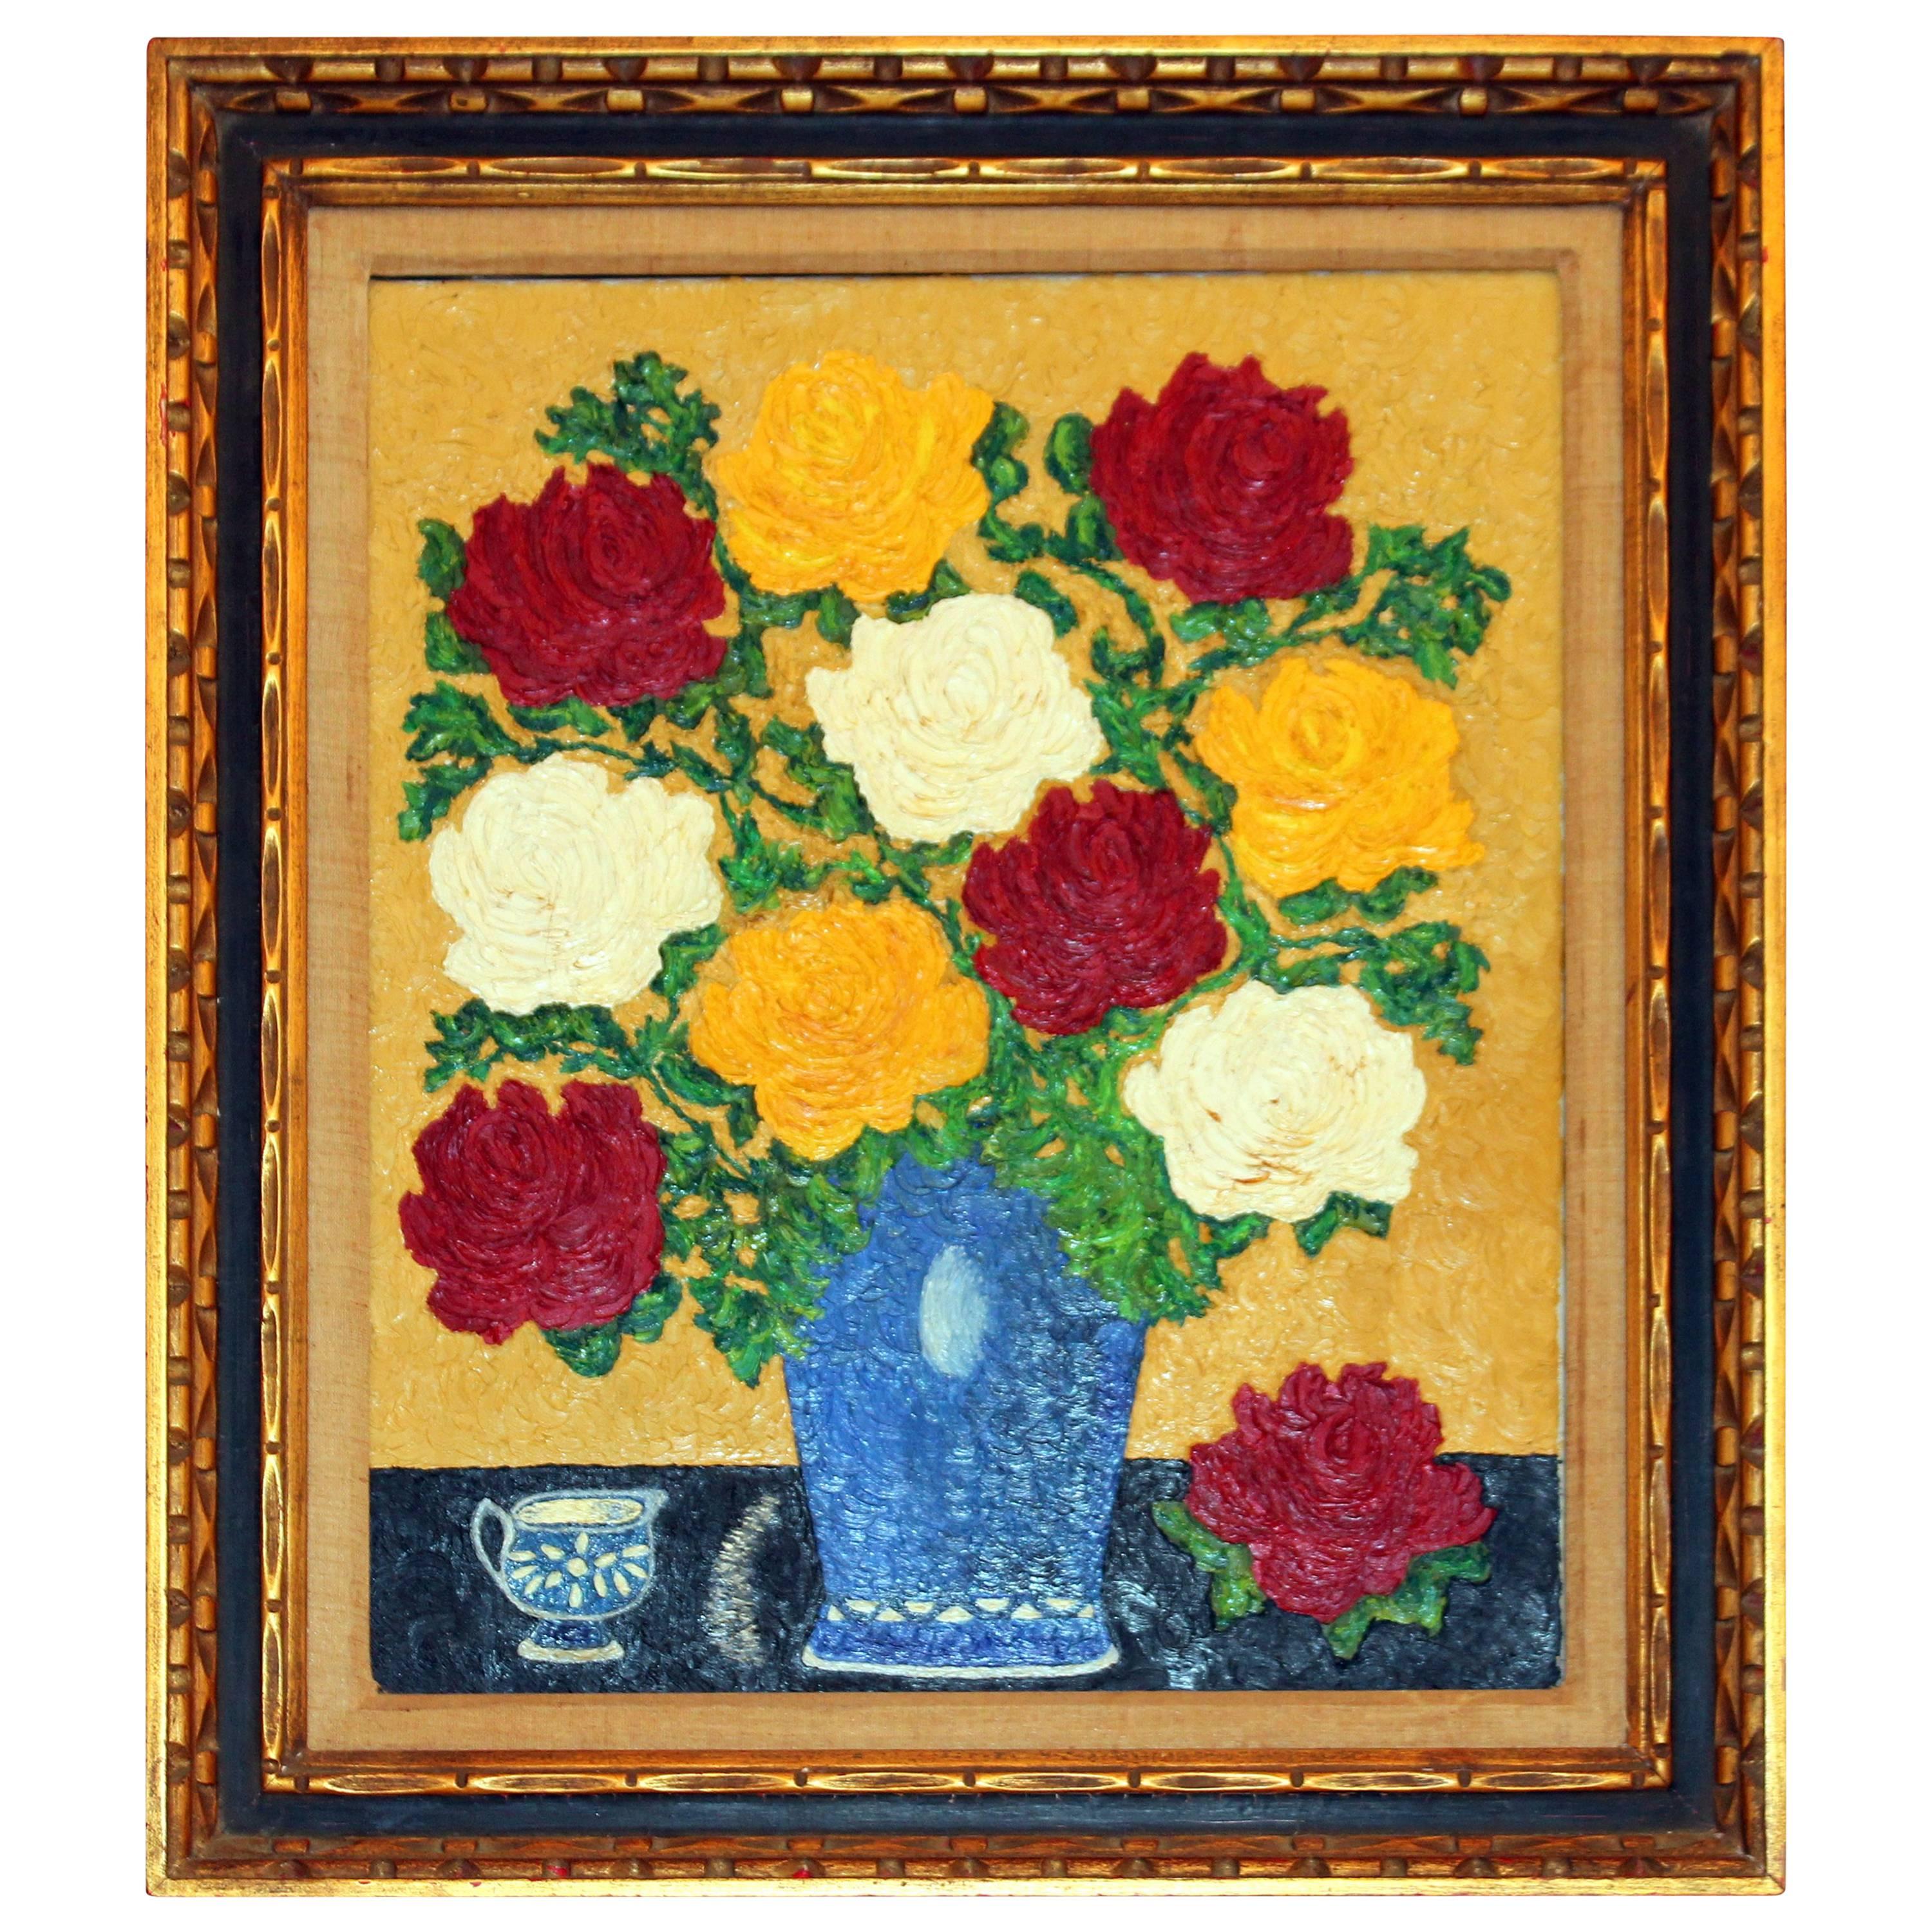 Vintage 1950s Large Framed Oil Painting on Canvas Still Life Flowers